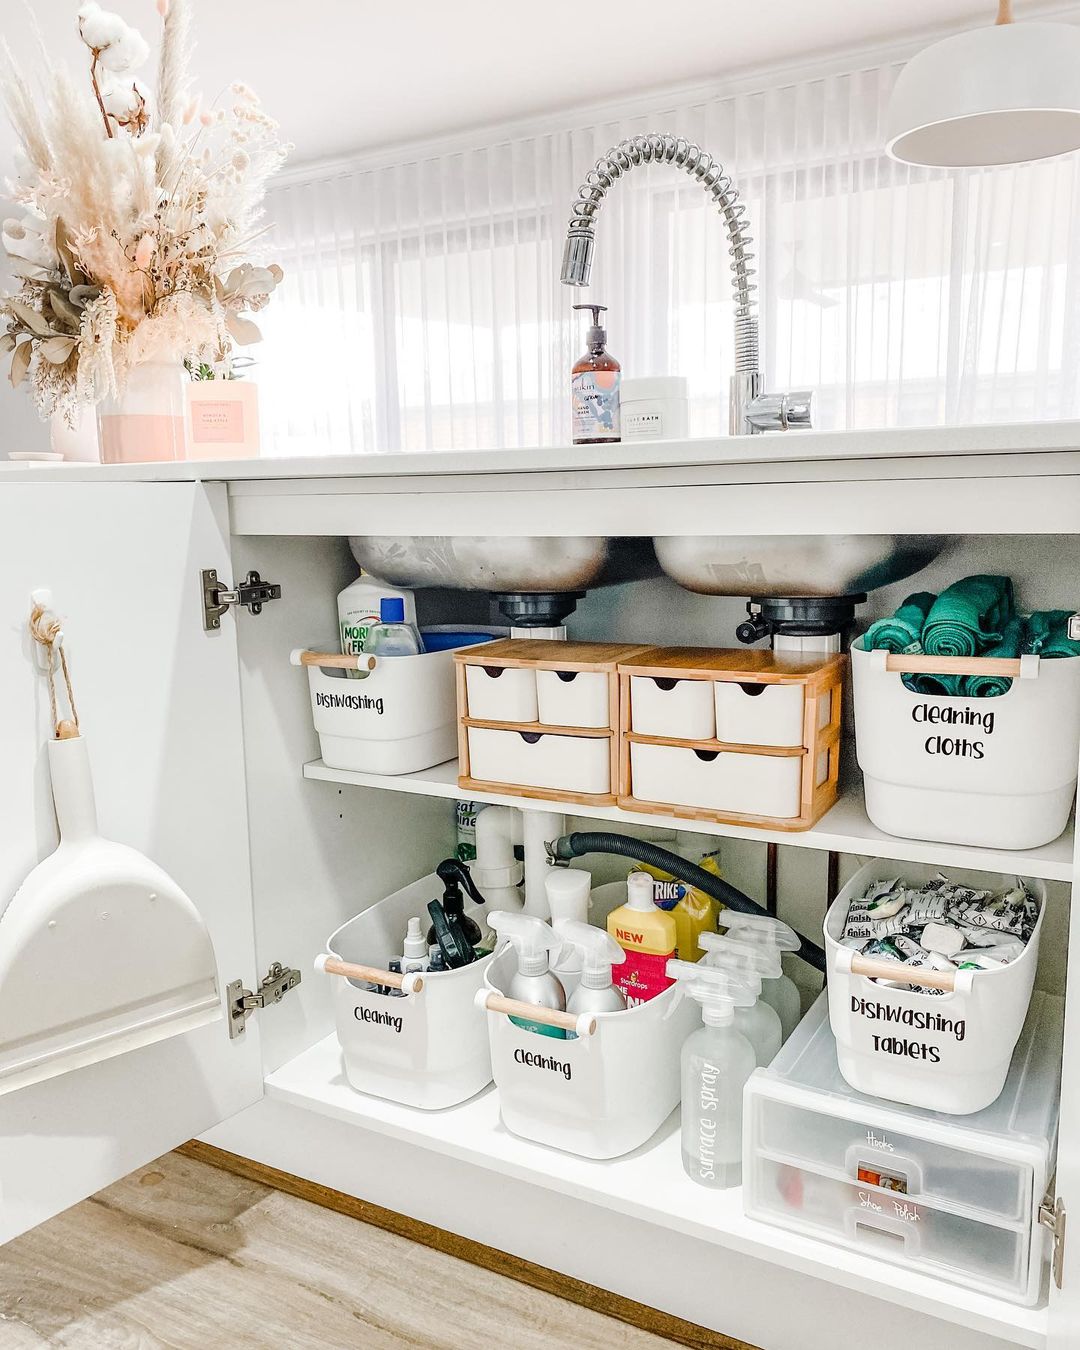 Under sink cabinet organized with shelving and storage bins. Photo by Instagram user @ashleejayinteriors